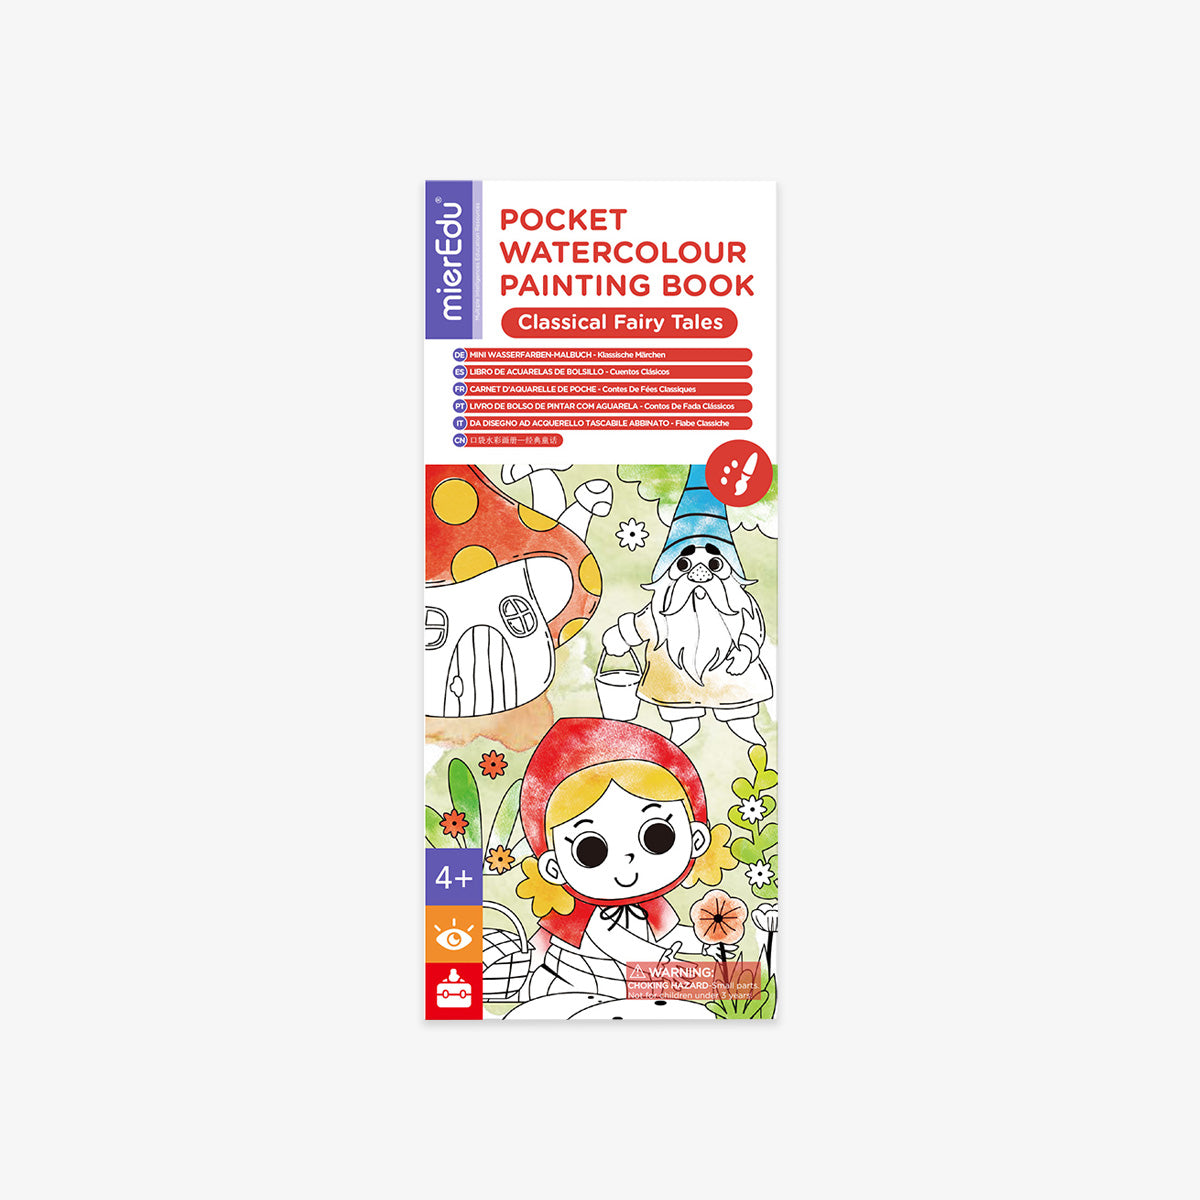 POCKET WATERCOLOUR PAINTING BOOK // CLASSICAL FAIRY TALES